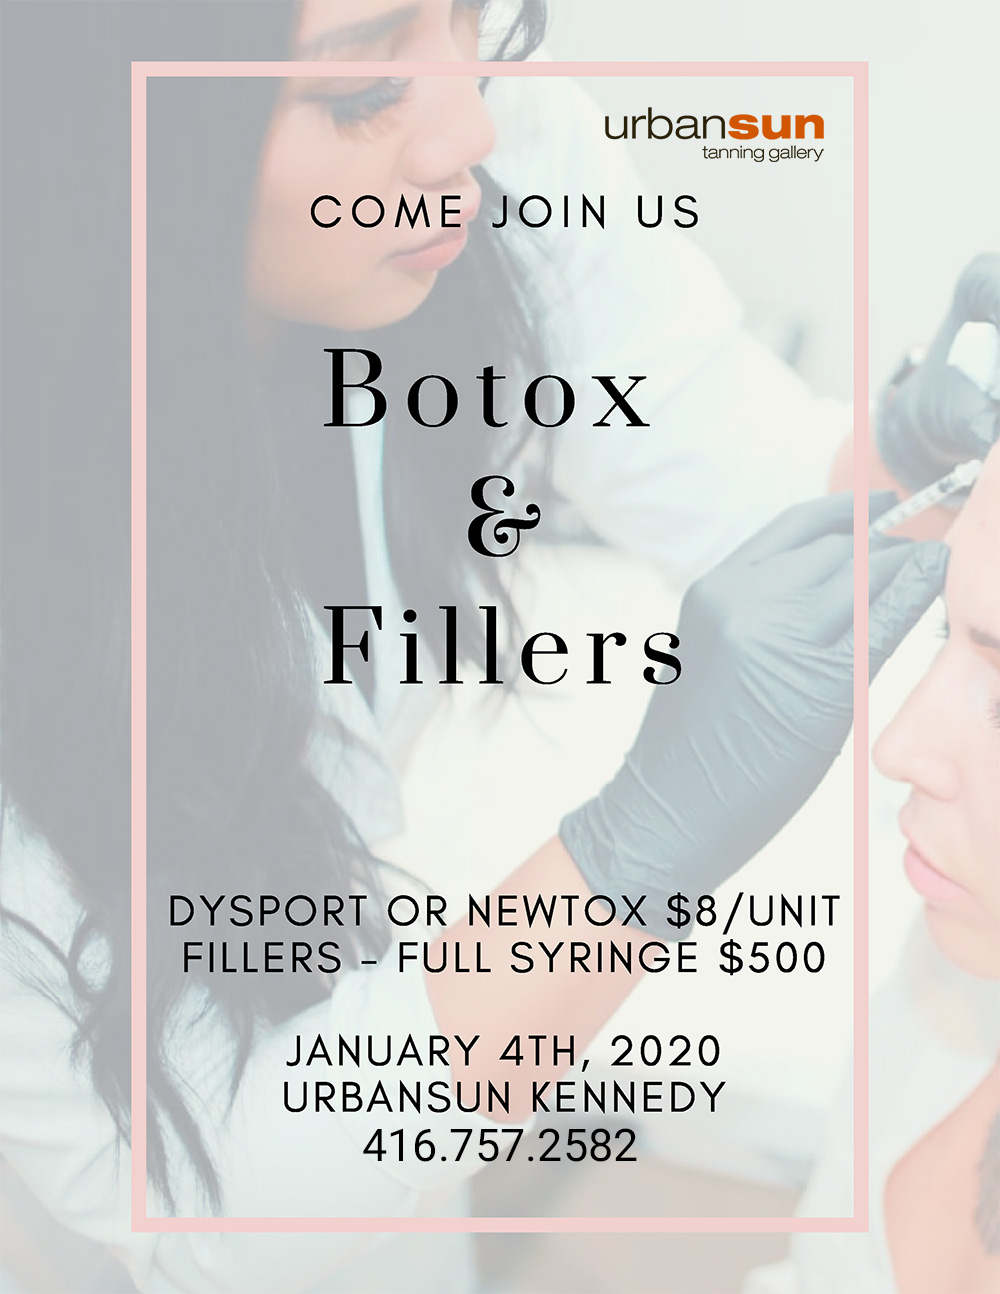 Botox & Fillers! January 4th, 2020